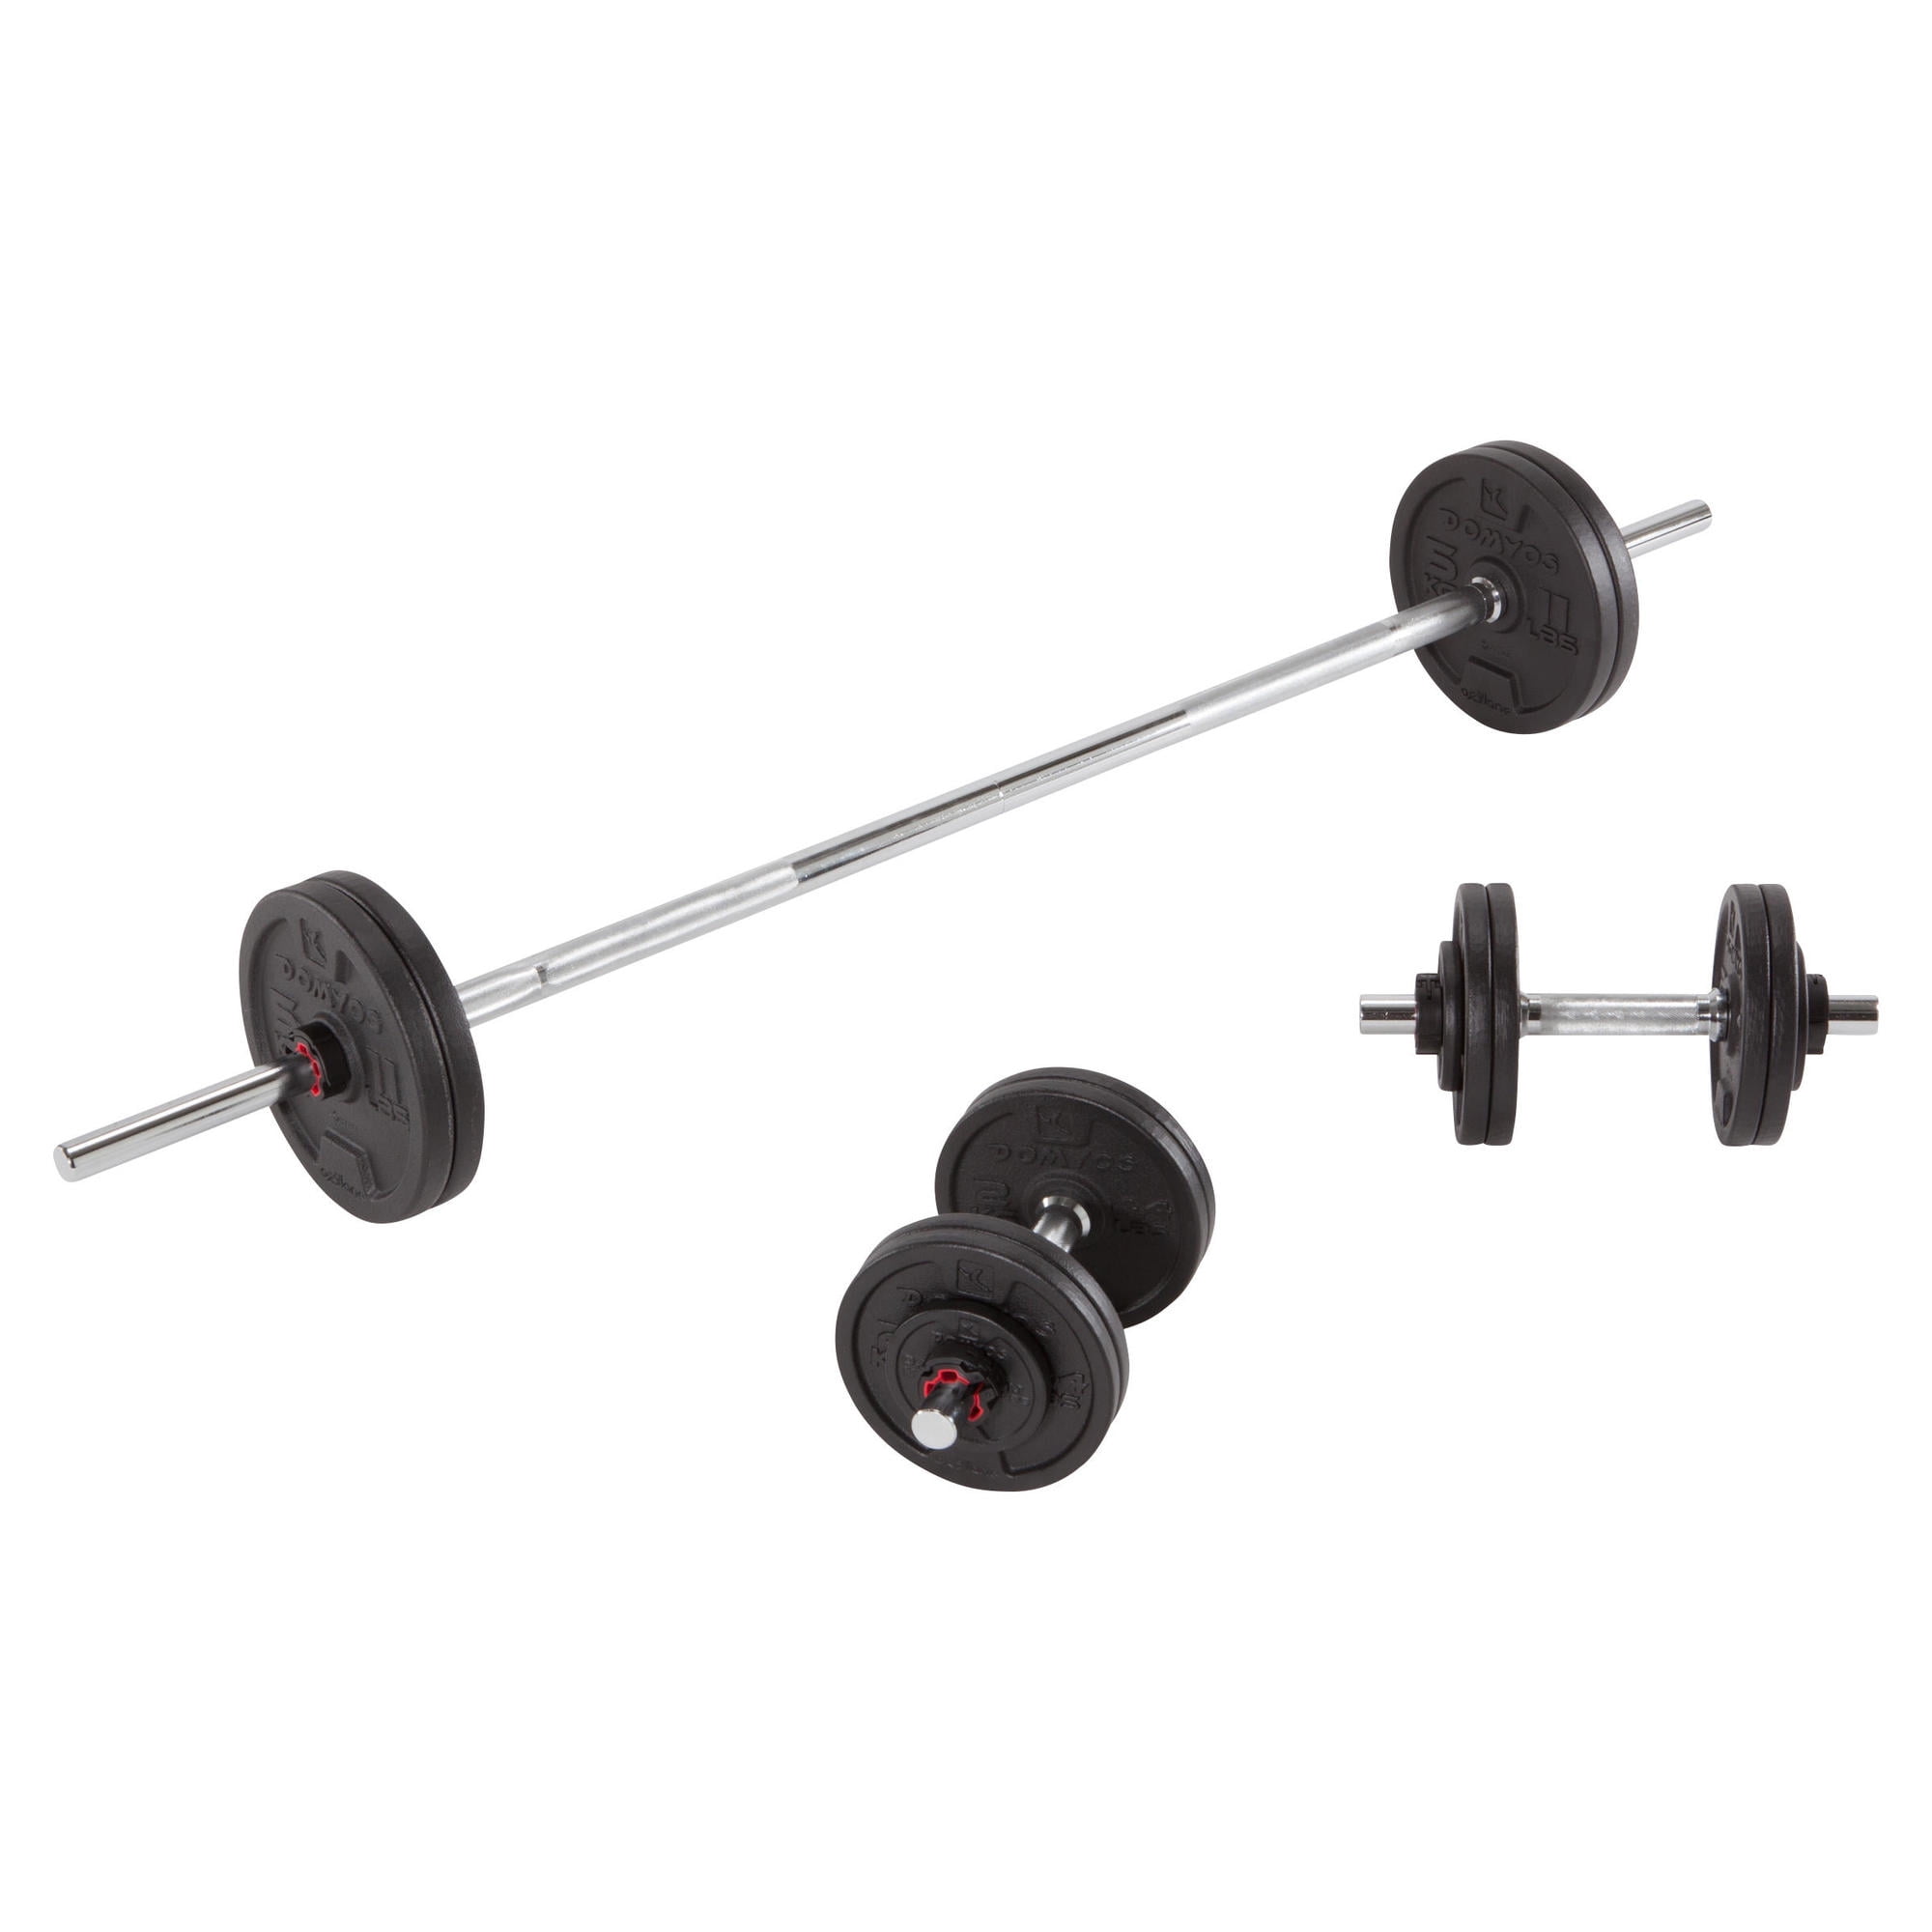 Totall 66/88/110LB Weight Dumbbell Set Adjustable Gym Barbell Plate Body Workout